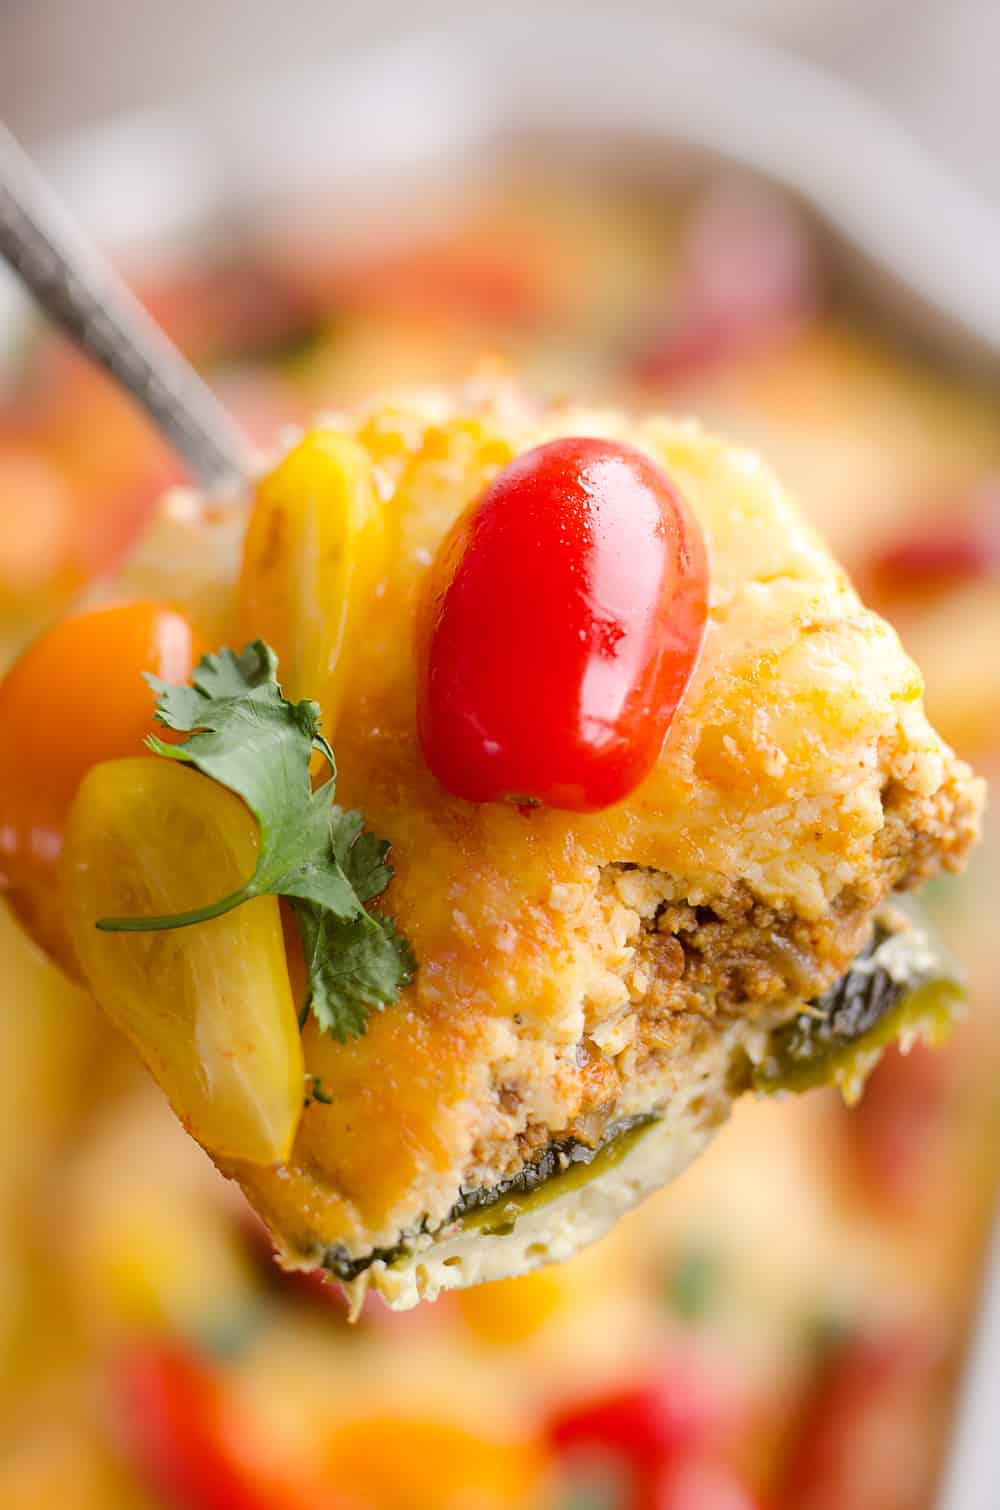 Roasted Poblano & Chorizo Egg Casserole is a low-carb breakfast recipe perfect for brunch or dinner! Fire roasted peppers are layered with spicy Chorizo and Mexican cheeses for a healthy egg bake bursting with bold flavors. 